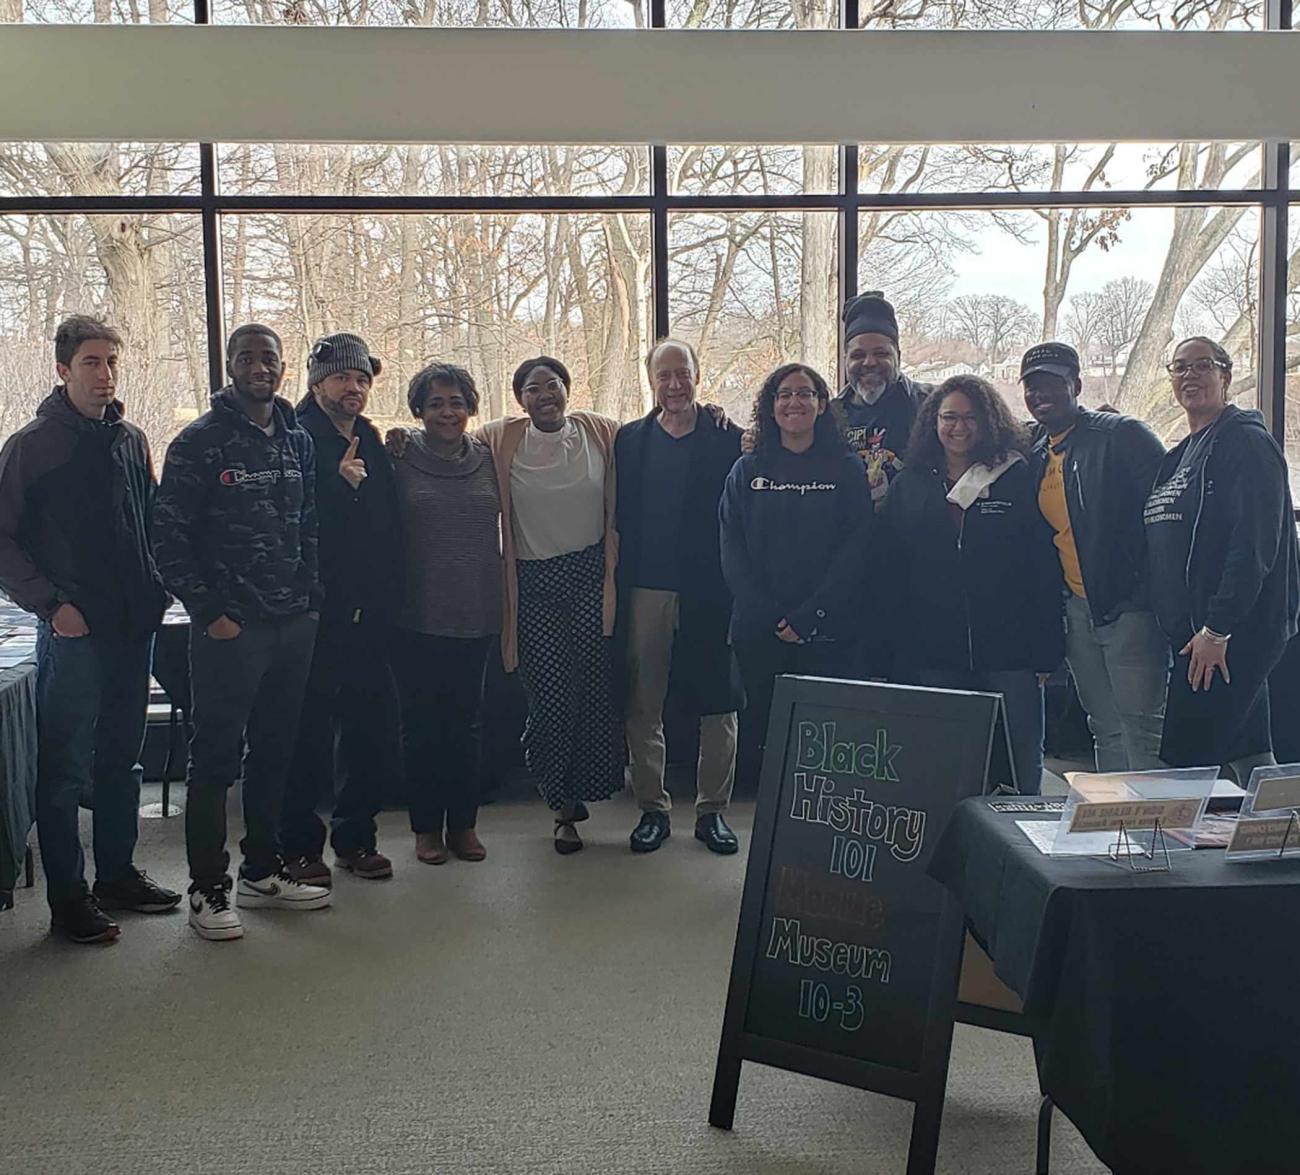 In alignment with the annual Springfield College Black History Month Luncheon, The Office of Multicultural Affairs hosted the Black History 101 Mobile Museum on campus in the Flynn Campus Union.